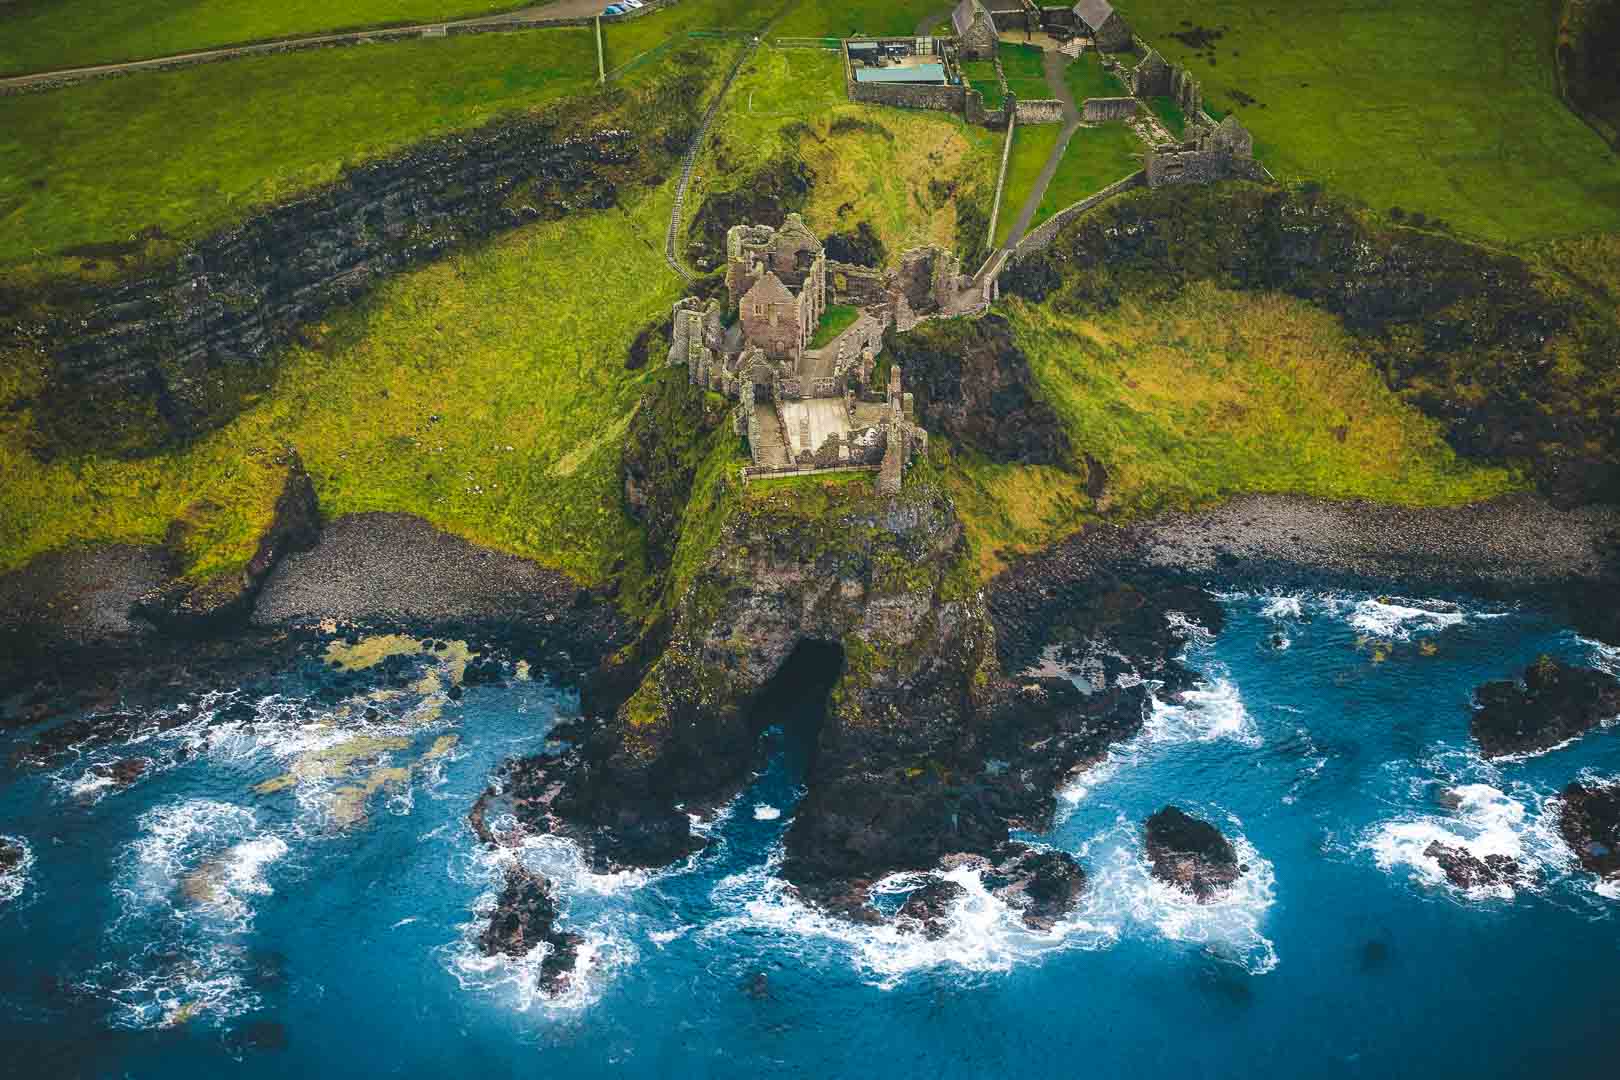 28 Game of Thrones Filming Locations in Northern Ireland – The Ultimate Guide